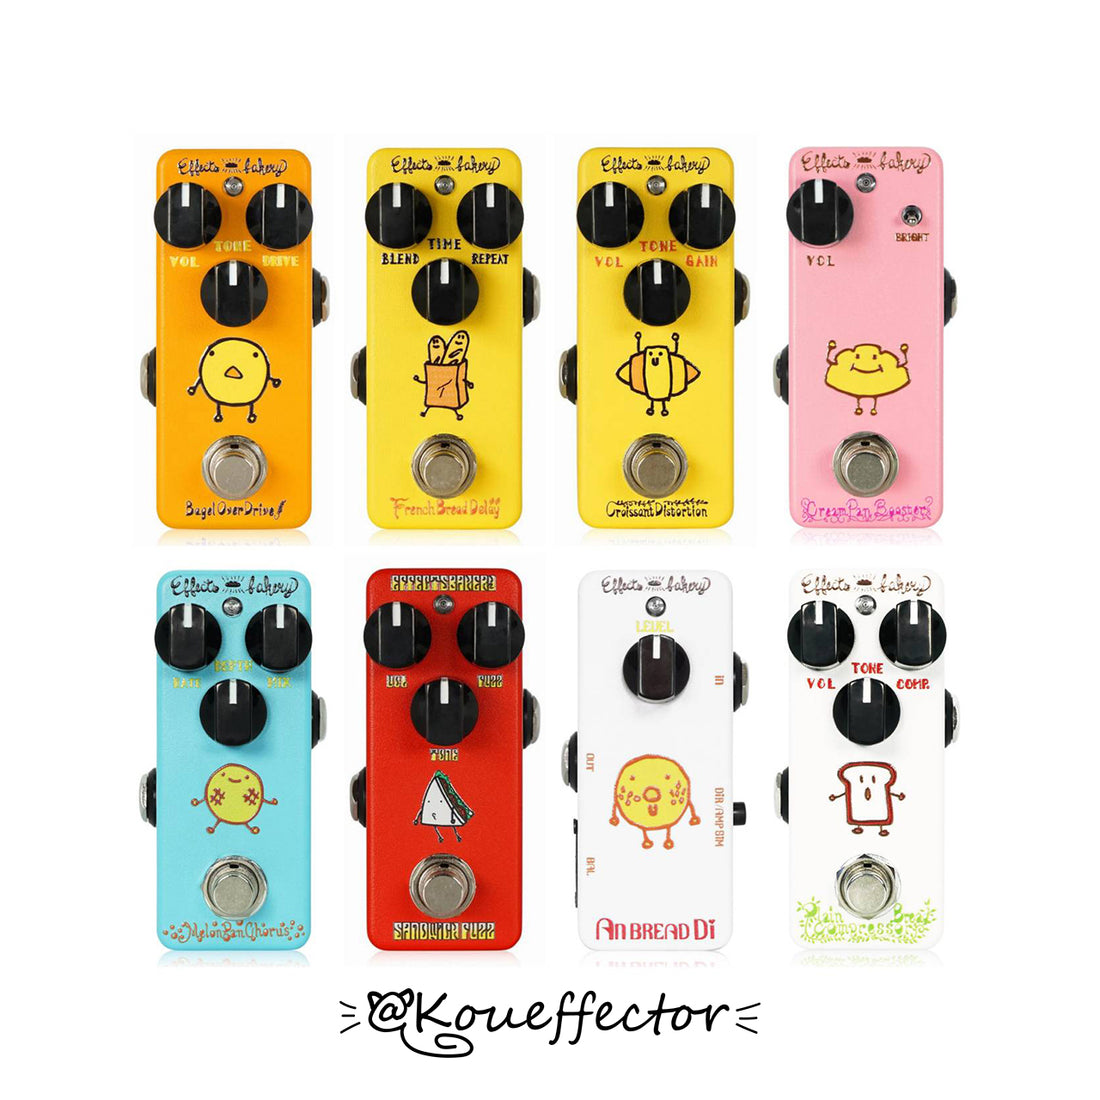 Effects Bakery koueffector 寇弟效果器 8款經典效果器 多件優惠中